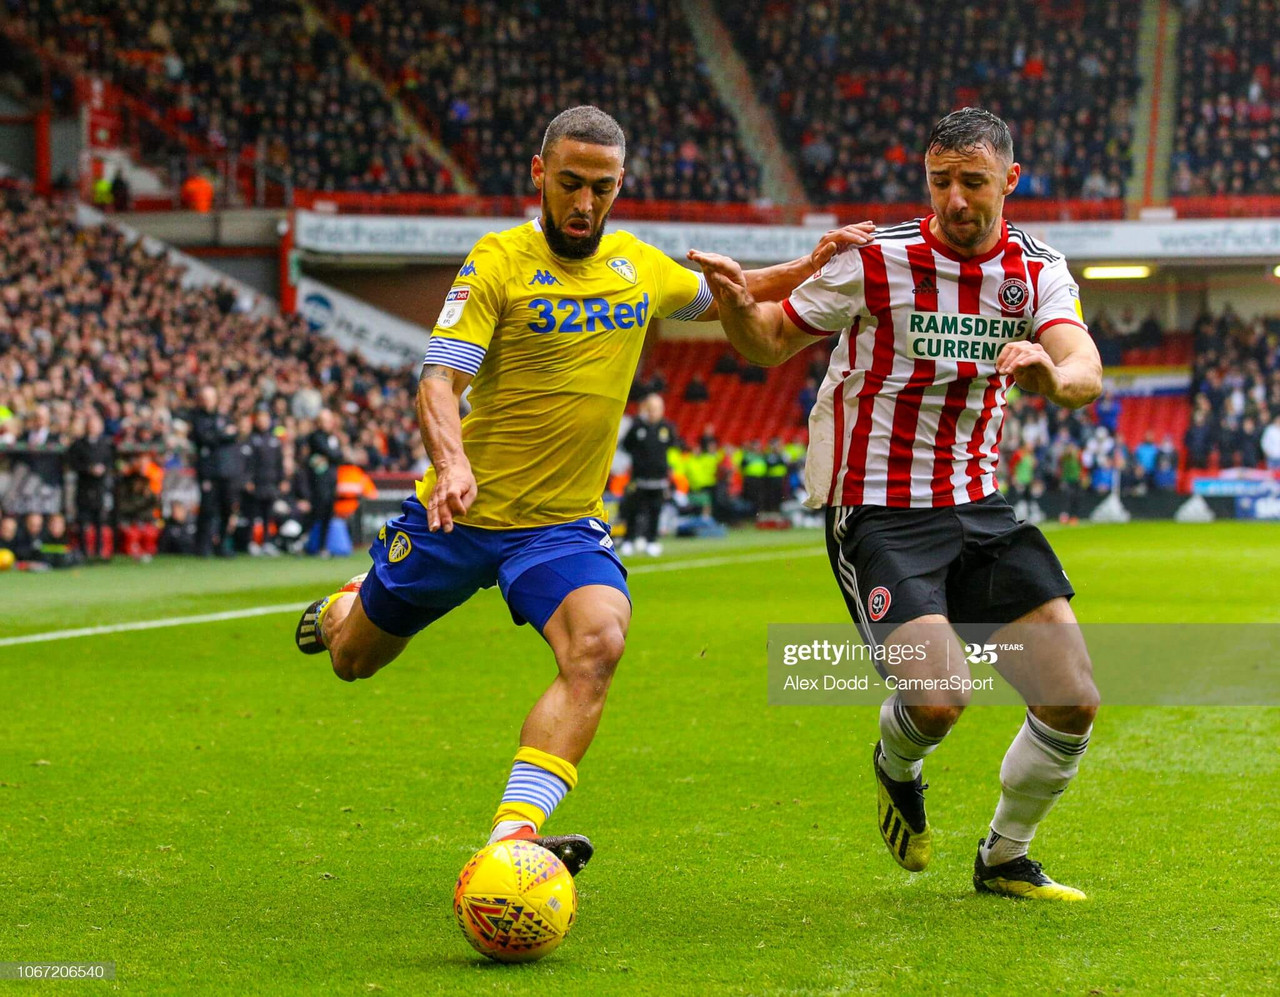 Sheffield United vs Leeds United preview: How to watch, kick off time, team news, predicted lineups and ones to watch